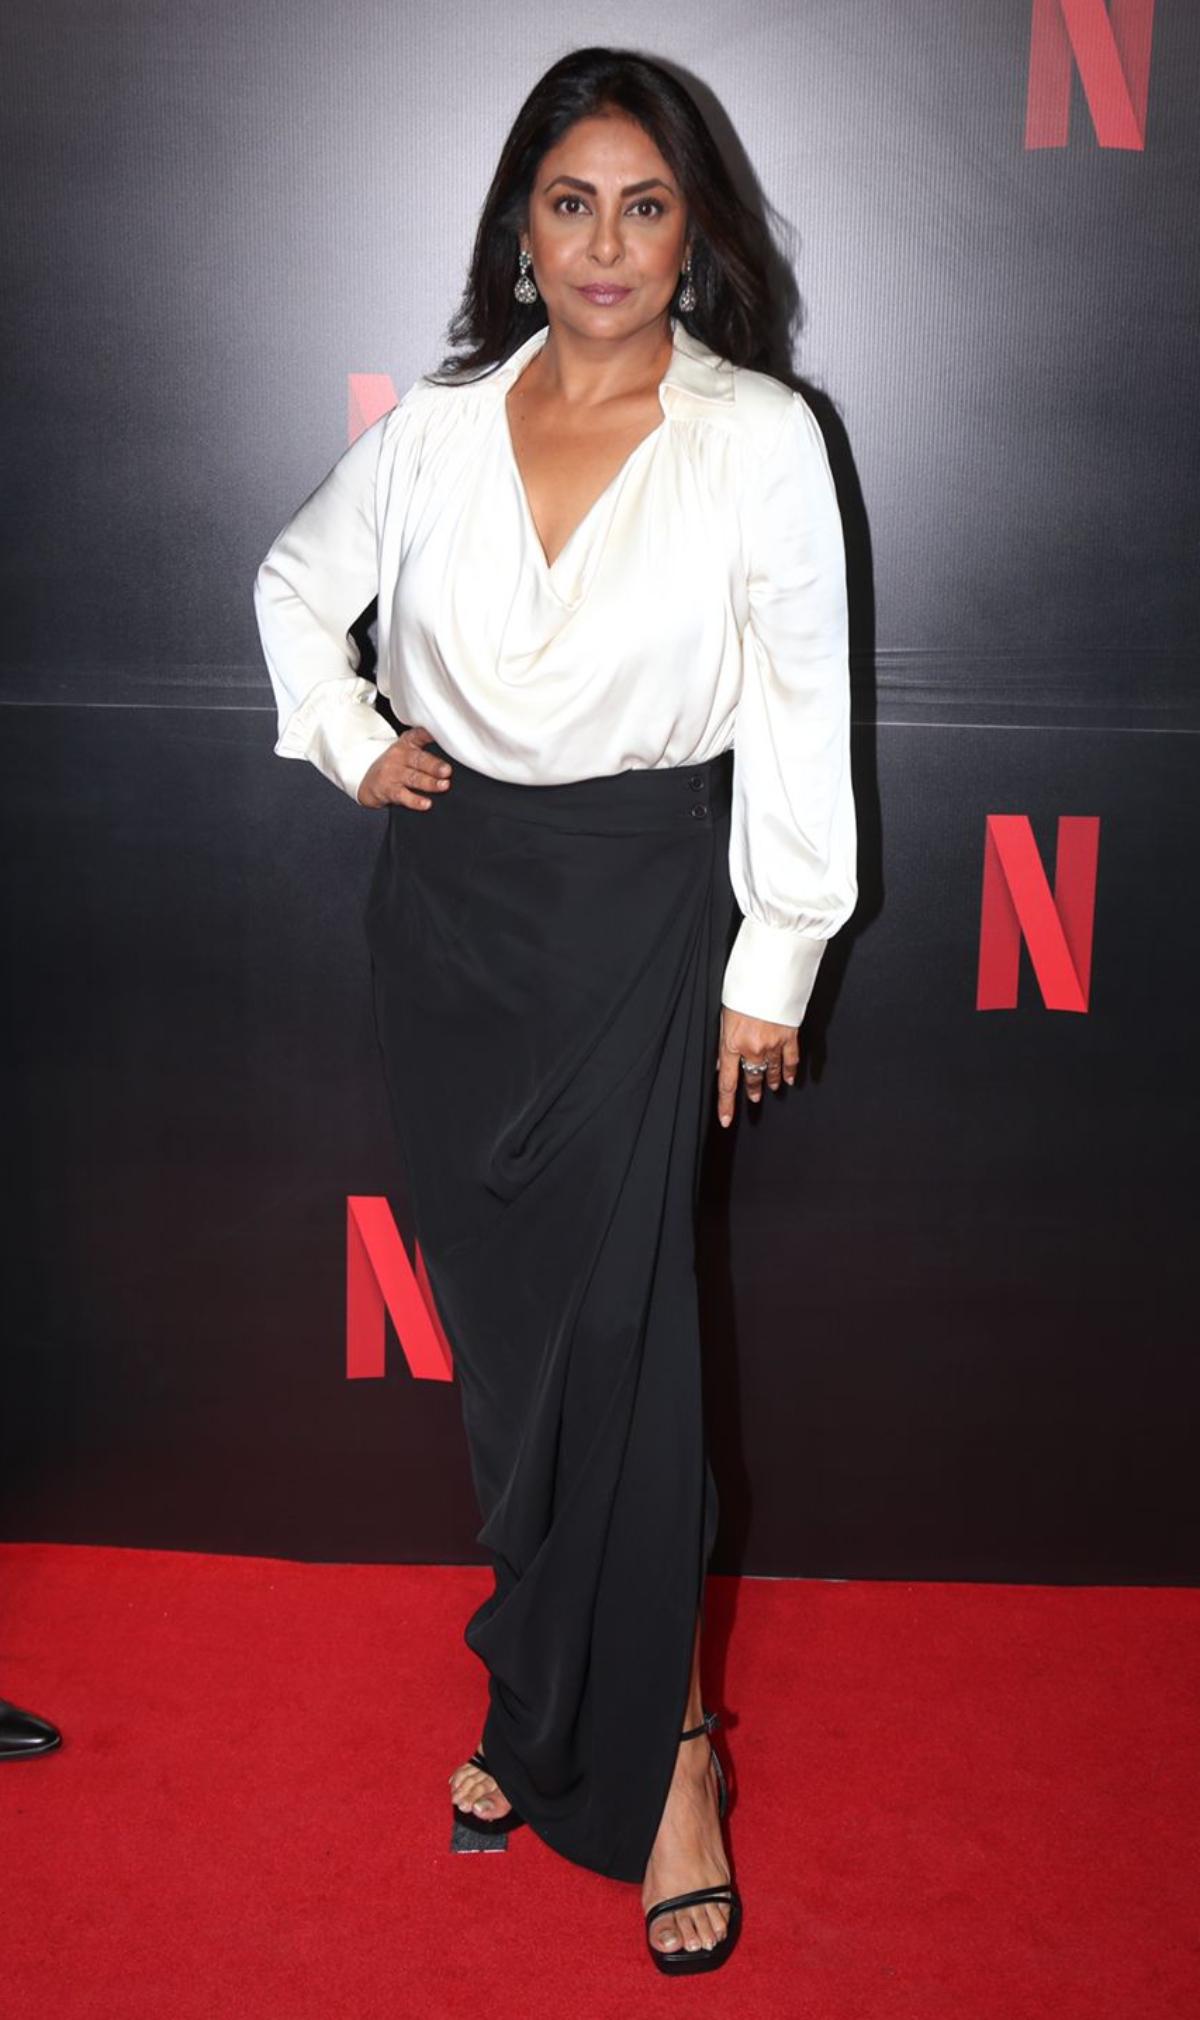 'The Delhi Crime 2' actor, Shefali Shah exudes boss-lady vibes as she graces the red carpet in a spotless deep neck shirt style white top with a chic black skirt. 